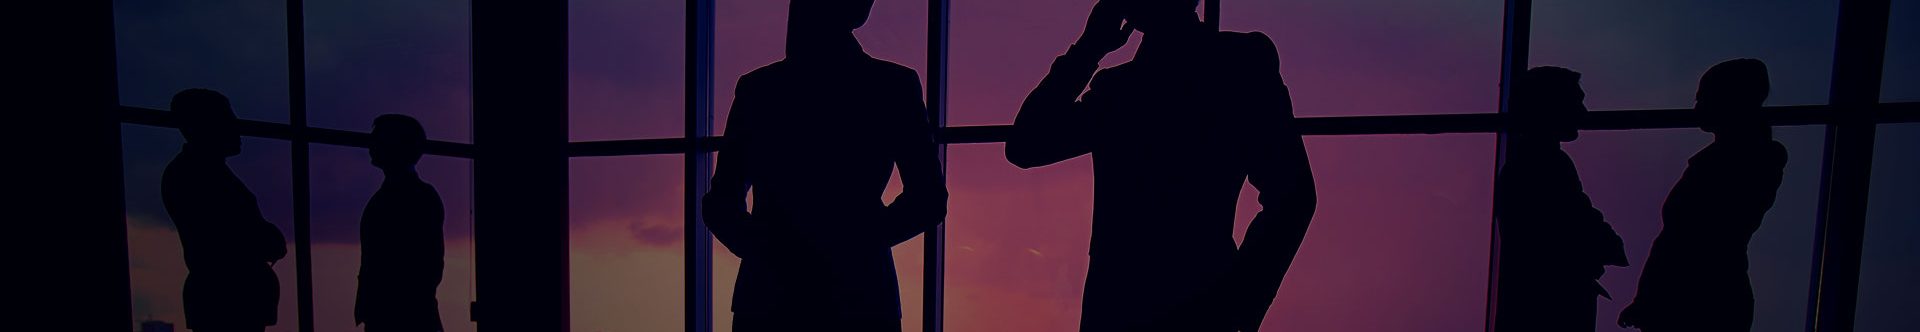 Business people silhouettes in an office